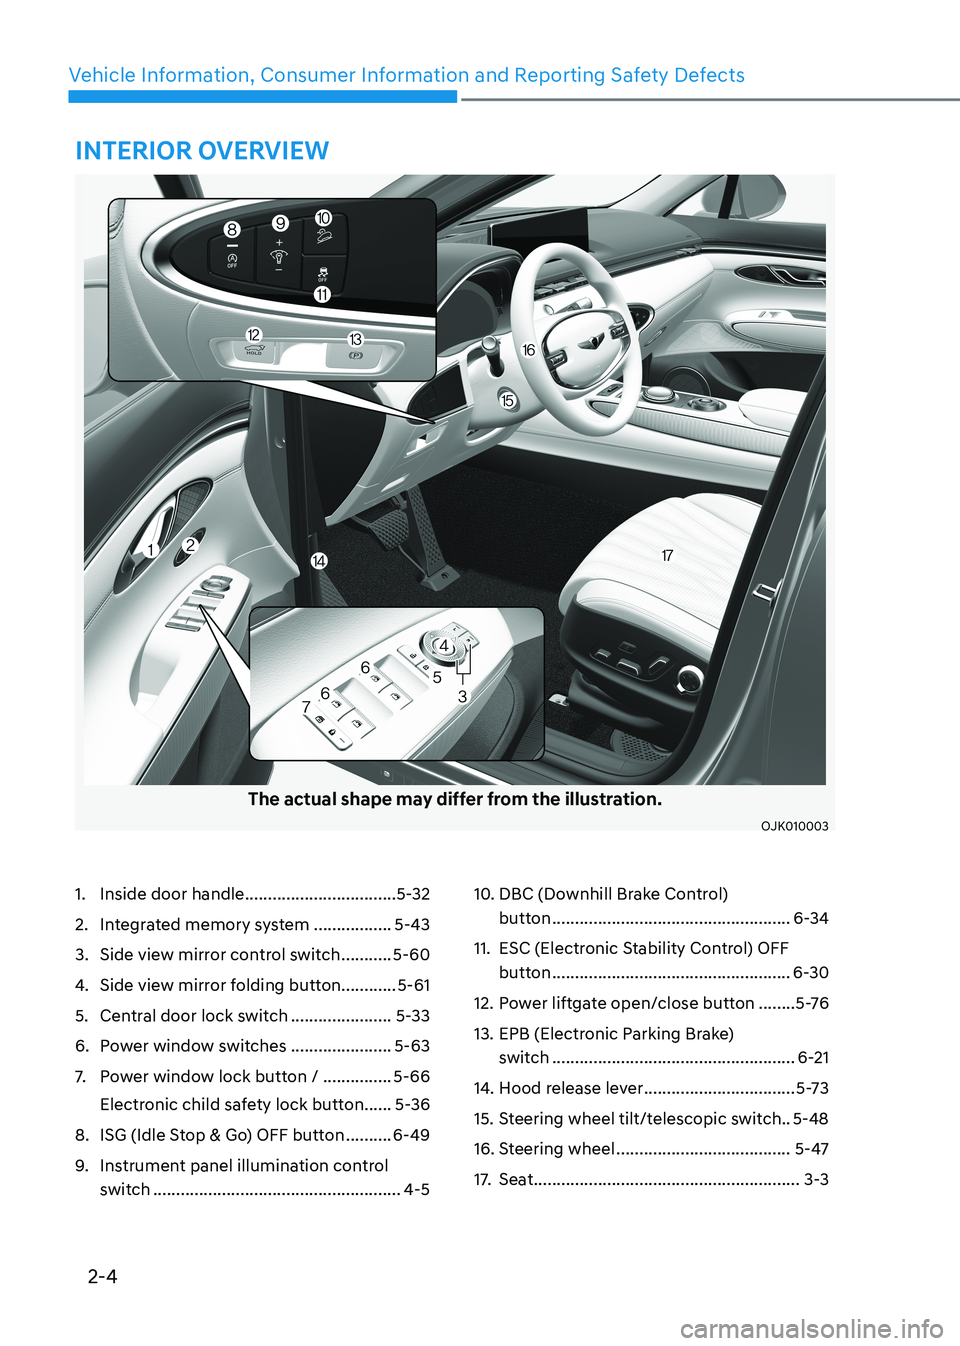 HYUNDAI GENESIS GV70 2021 User Guide 2-4
Vehicle Information, Consumer Information and Reporting Safety Defects
The actual shape may differ from the illustration.
OJK010003OJK010003
1. Inside door handle .................................